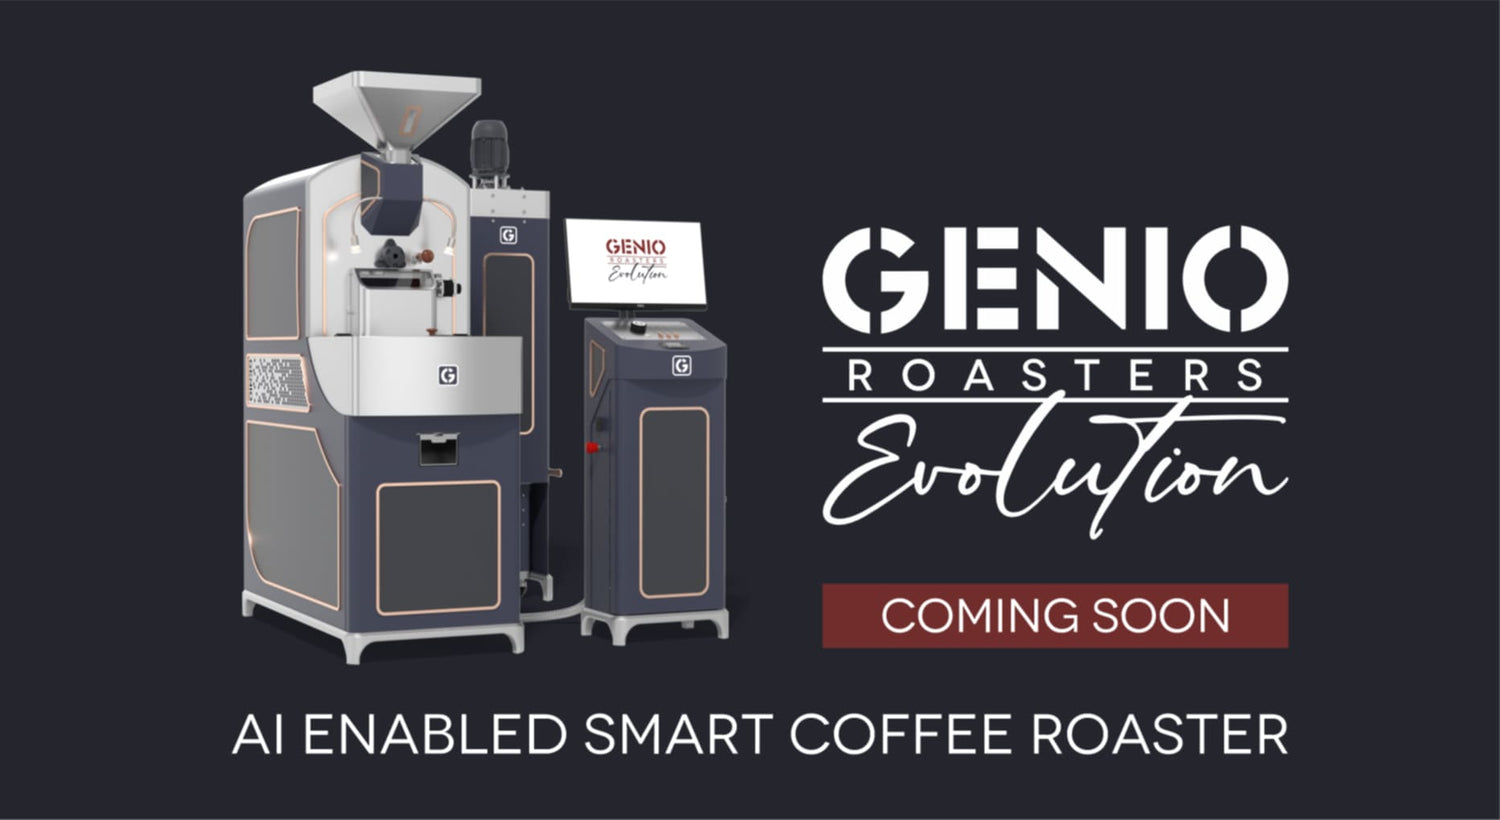 Introducing the Genio Roasters' Evolution Series —
Discover the Future of Coffee Roasting with the AI-Enabled Smart Coffee Roaster